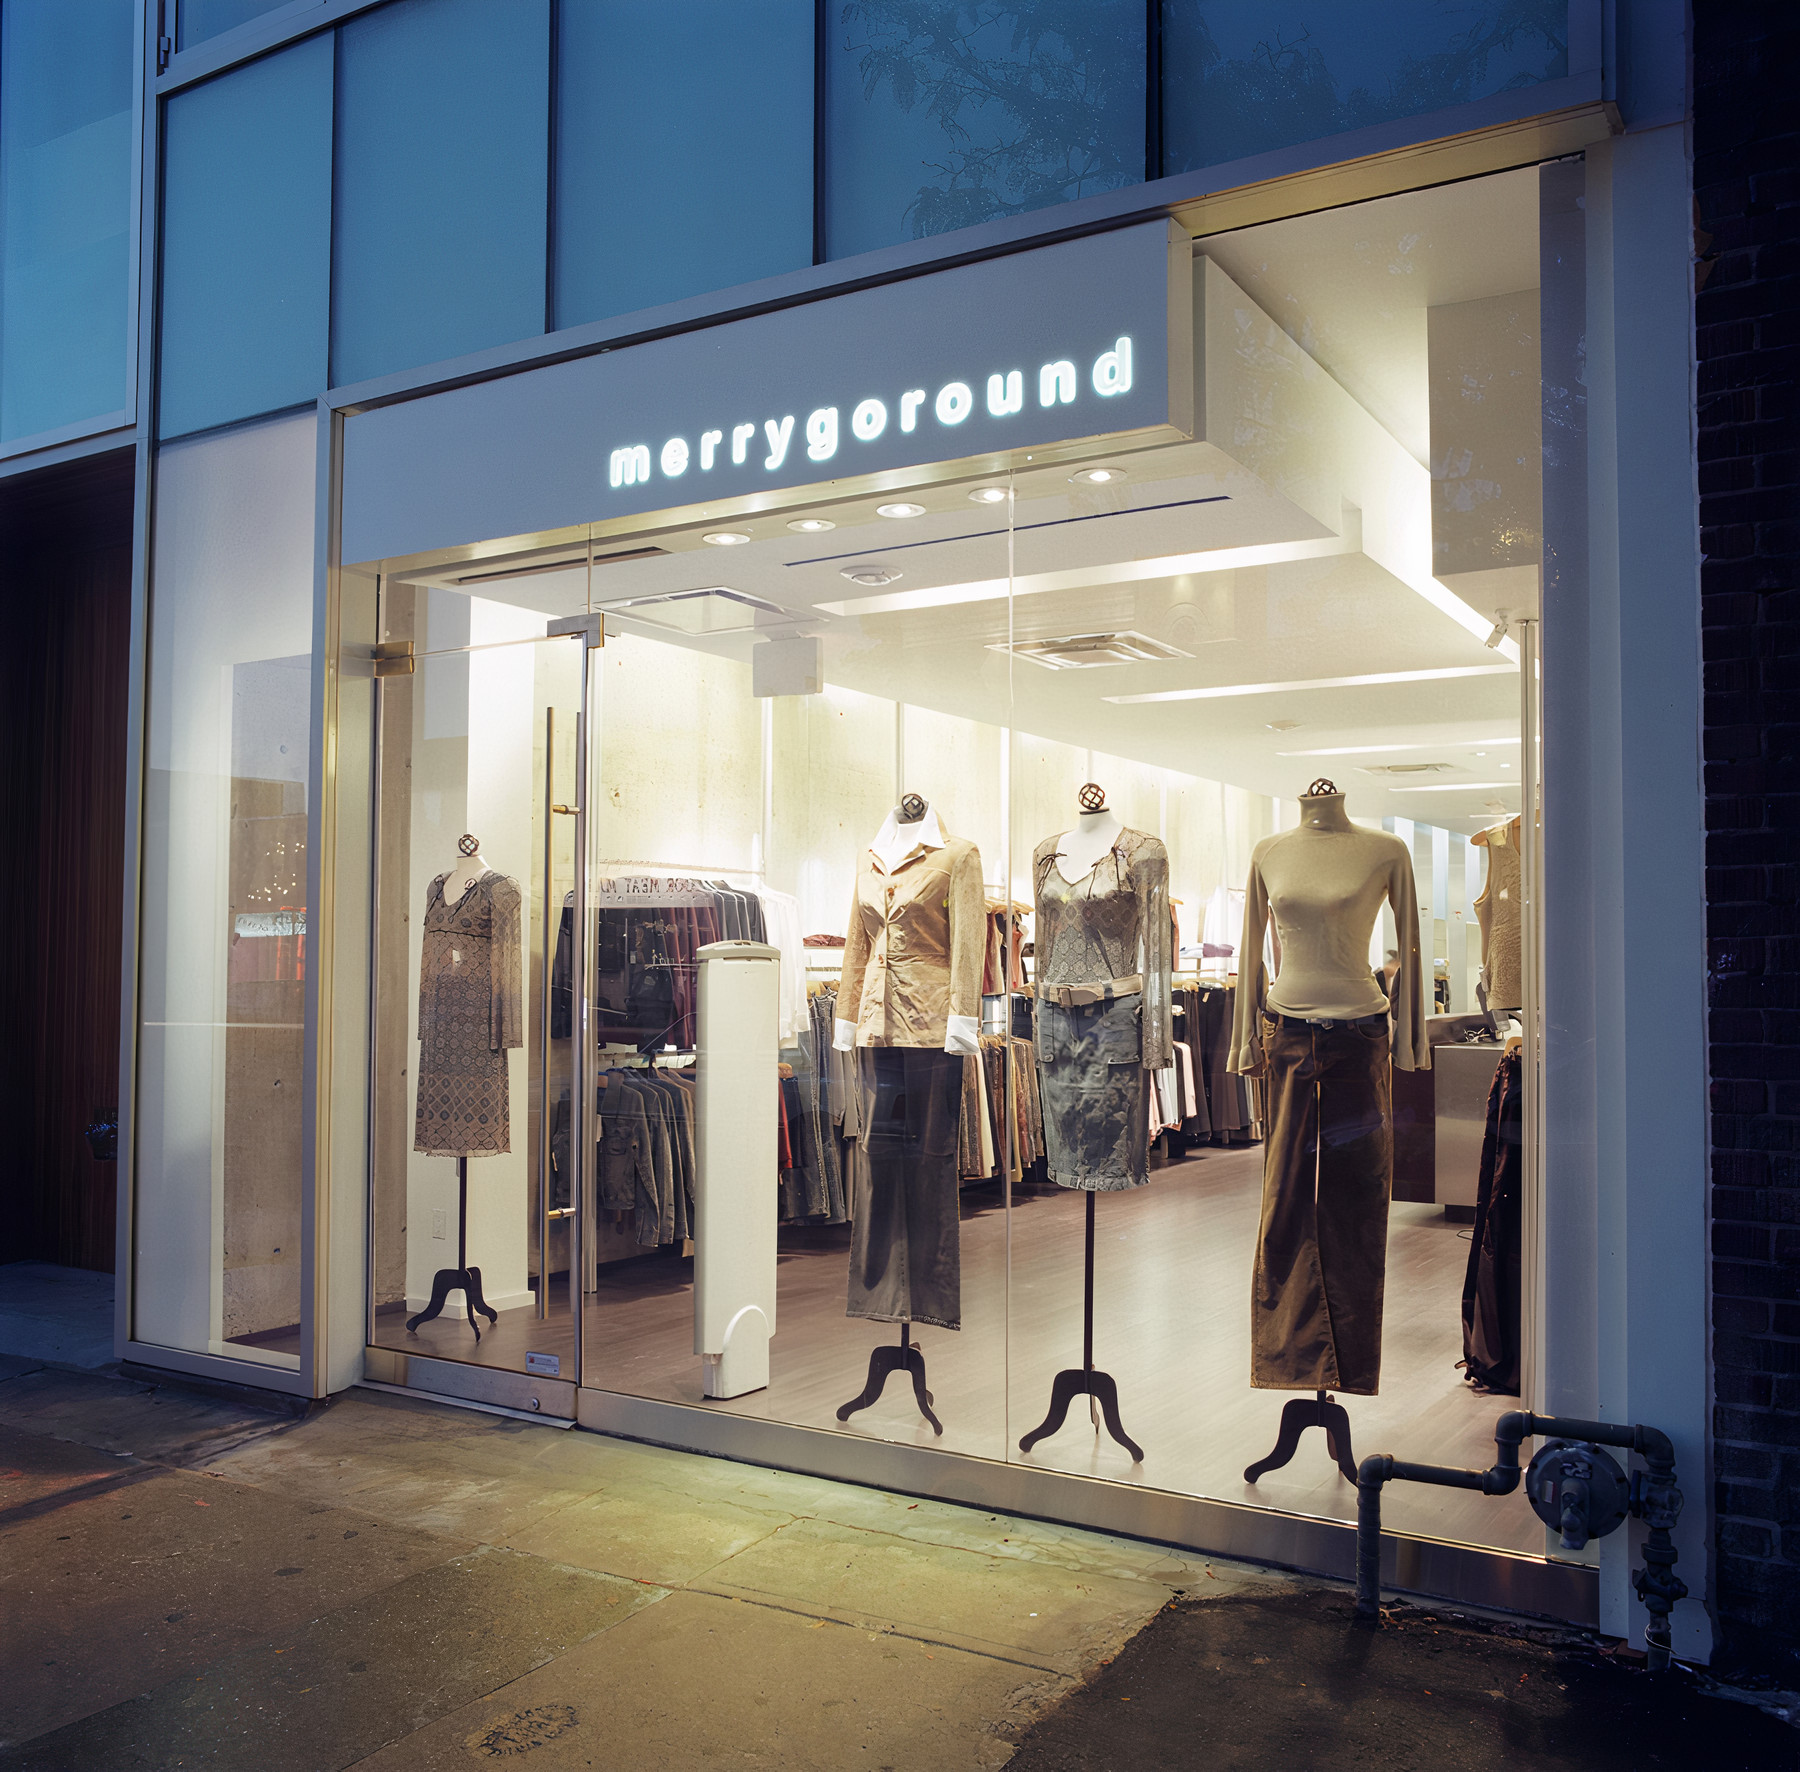 Merrygoround - Retail Rollout | CORE Architects Inc.